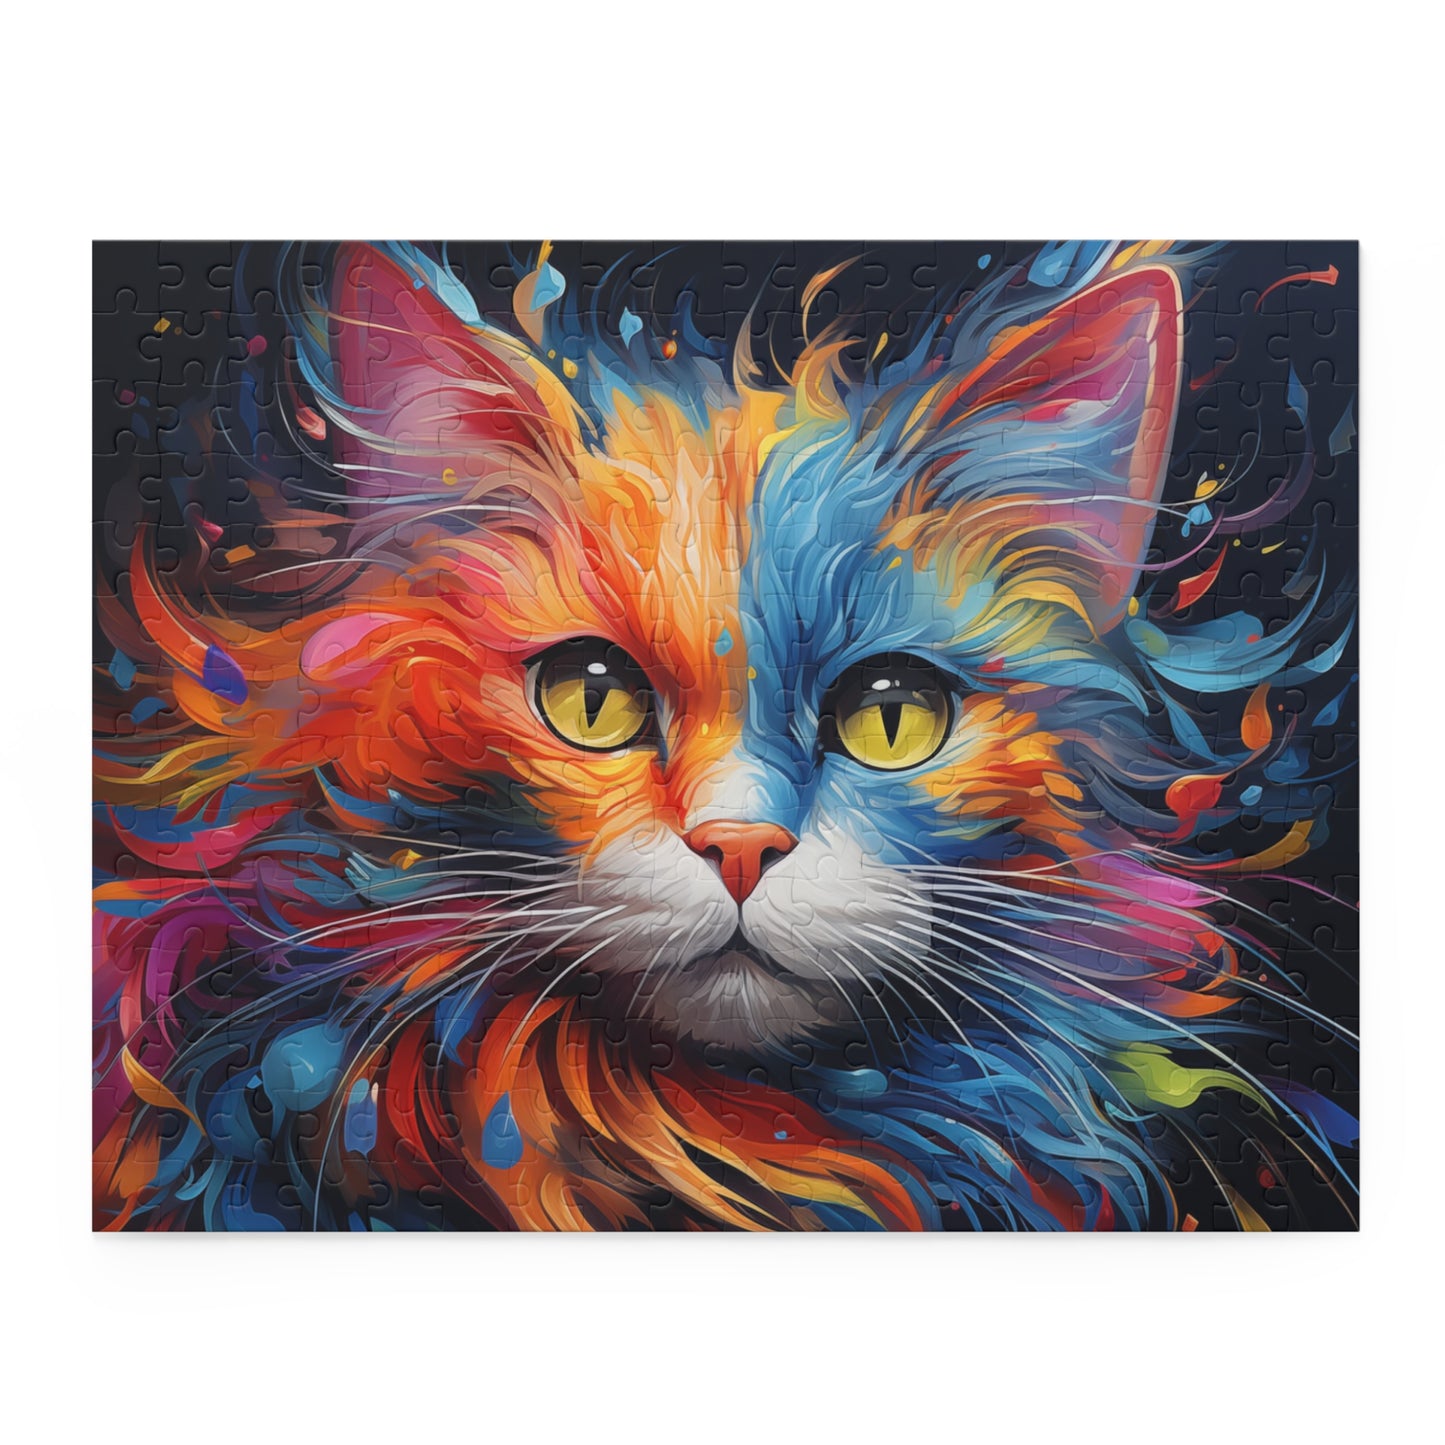 Abstract Watercolor Animal Cat Oil Paint Jigsaw Puzzle Adult Birthday Business Jigsaw Puzzle Gift for Him Funny Humorous Indoor Outdoor Game Gift For Her Online-3